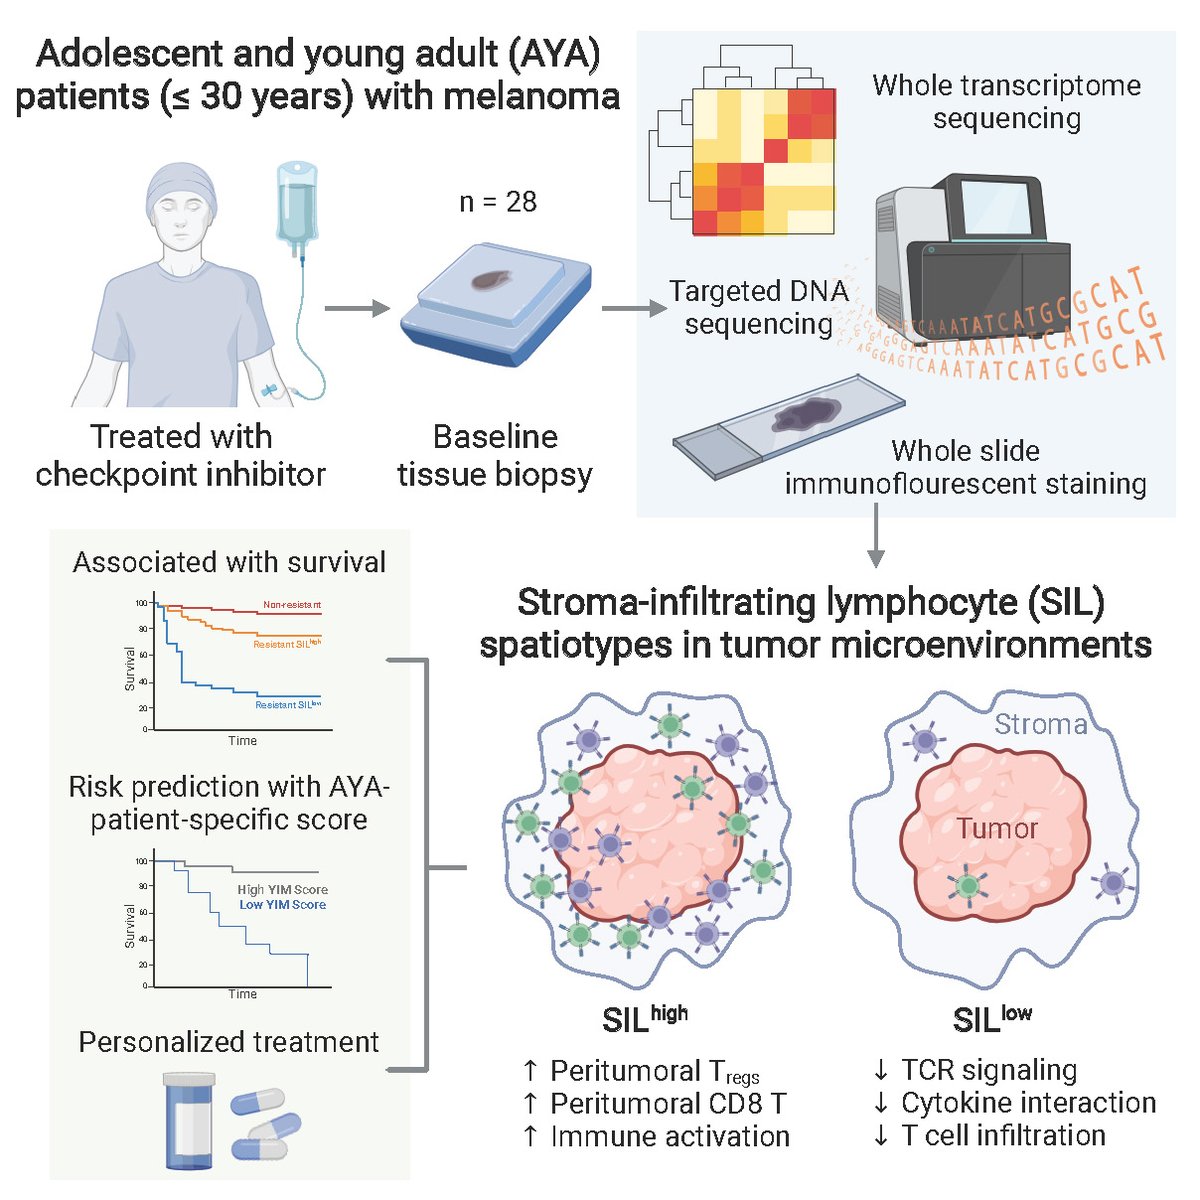 A new study from @MelanomaAus identified distinct SIL (stroma-infiltrating lymphocyte) tumours and YIM scores that impact #Cancer #immunotherapy in young people @NatureComms @SpringerNature Link: nature.com/articles/s4146… @xinyubaicath @JWilmott38 @ProfRScolyerMIA @ProfGLongMIA